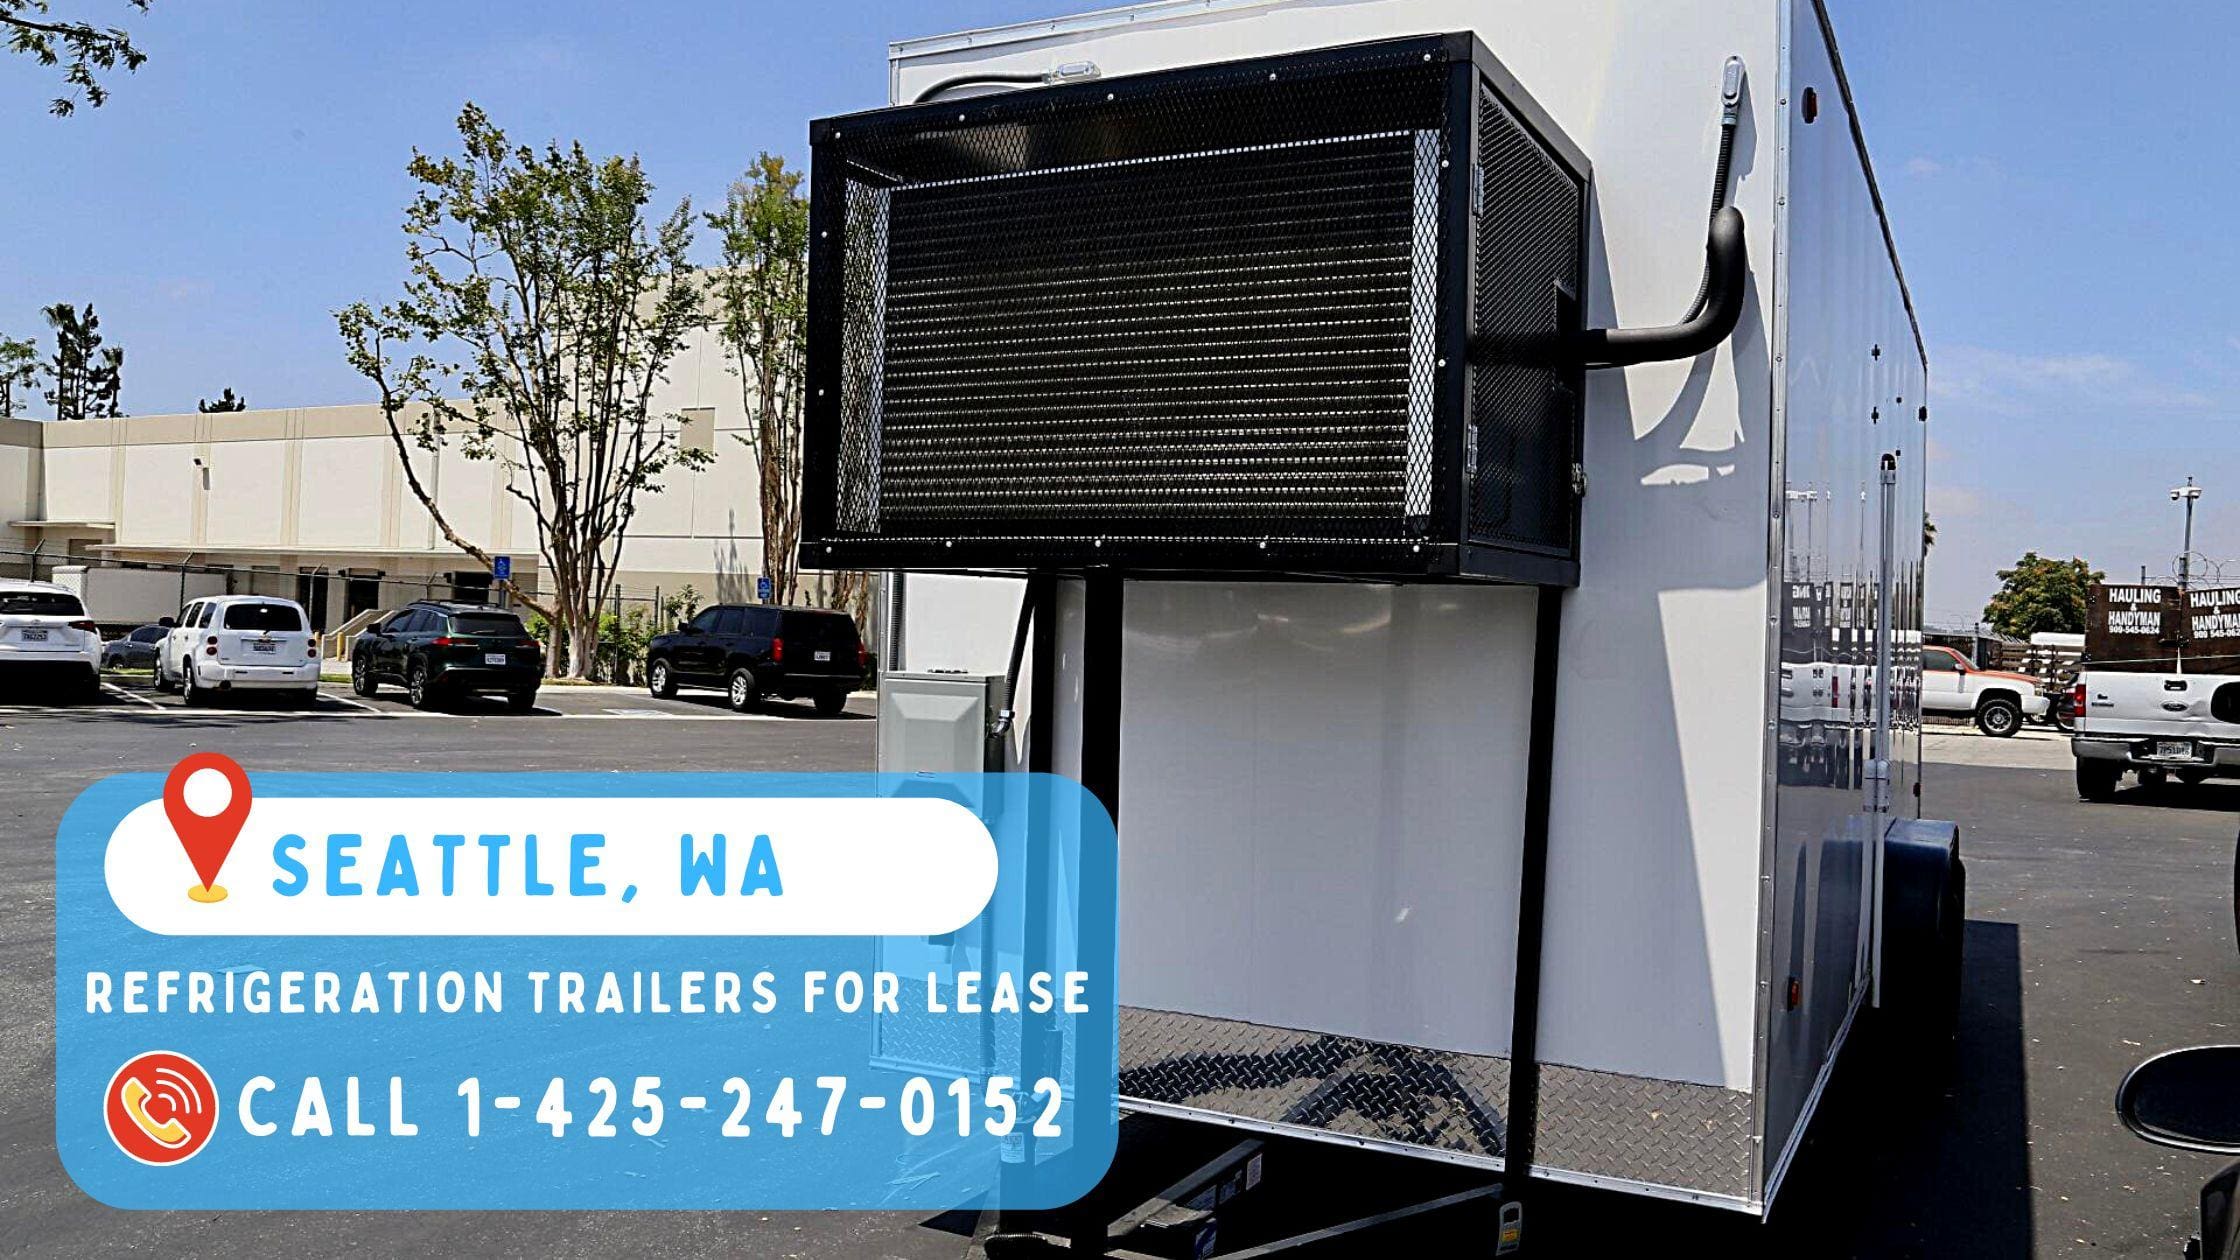 Refrigeration Trailers for Lease in Seattle